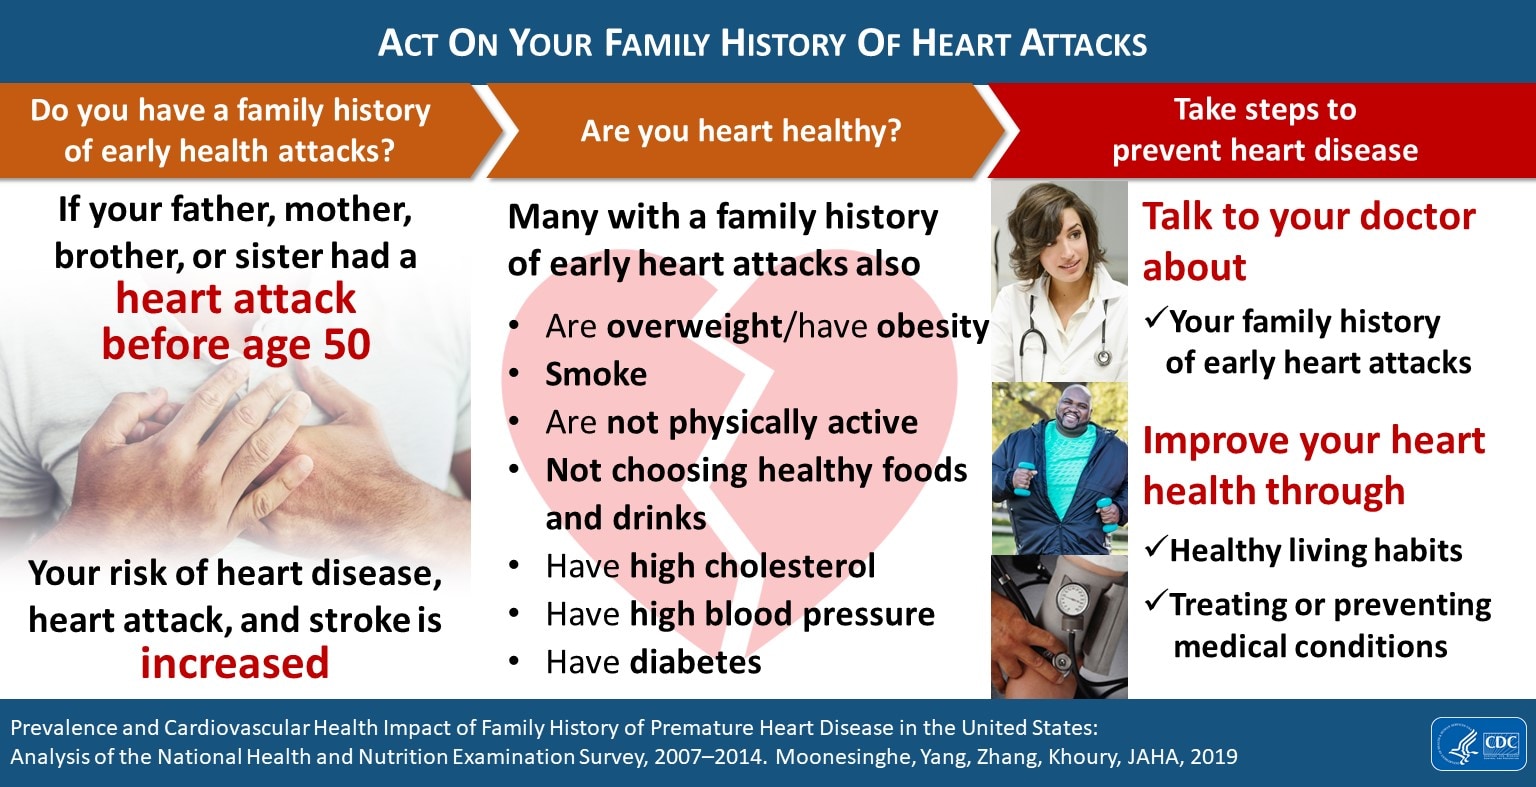 Act On Your Family History Of Heart Attacks